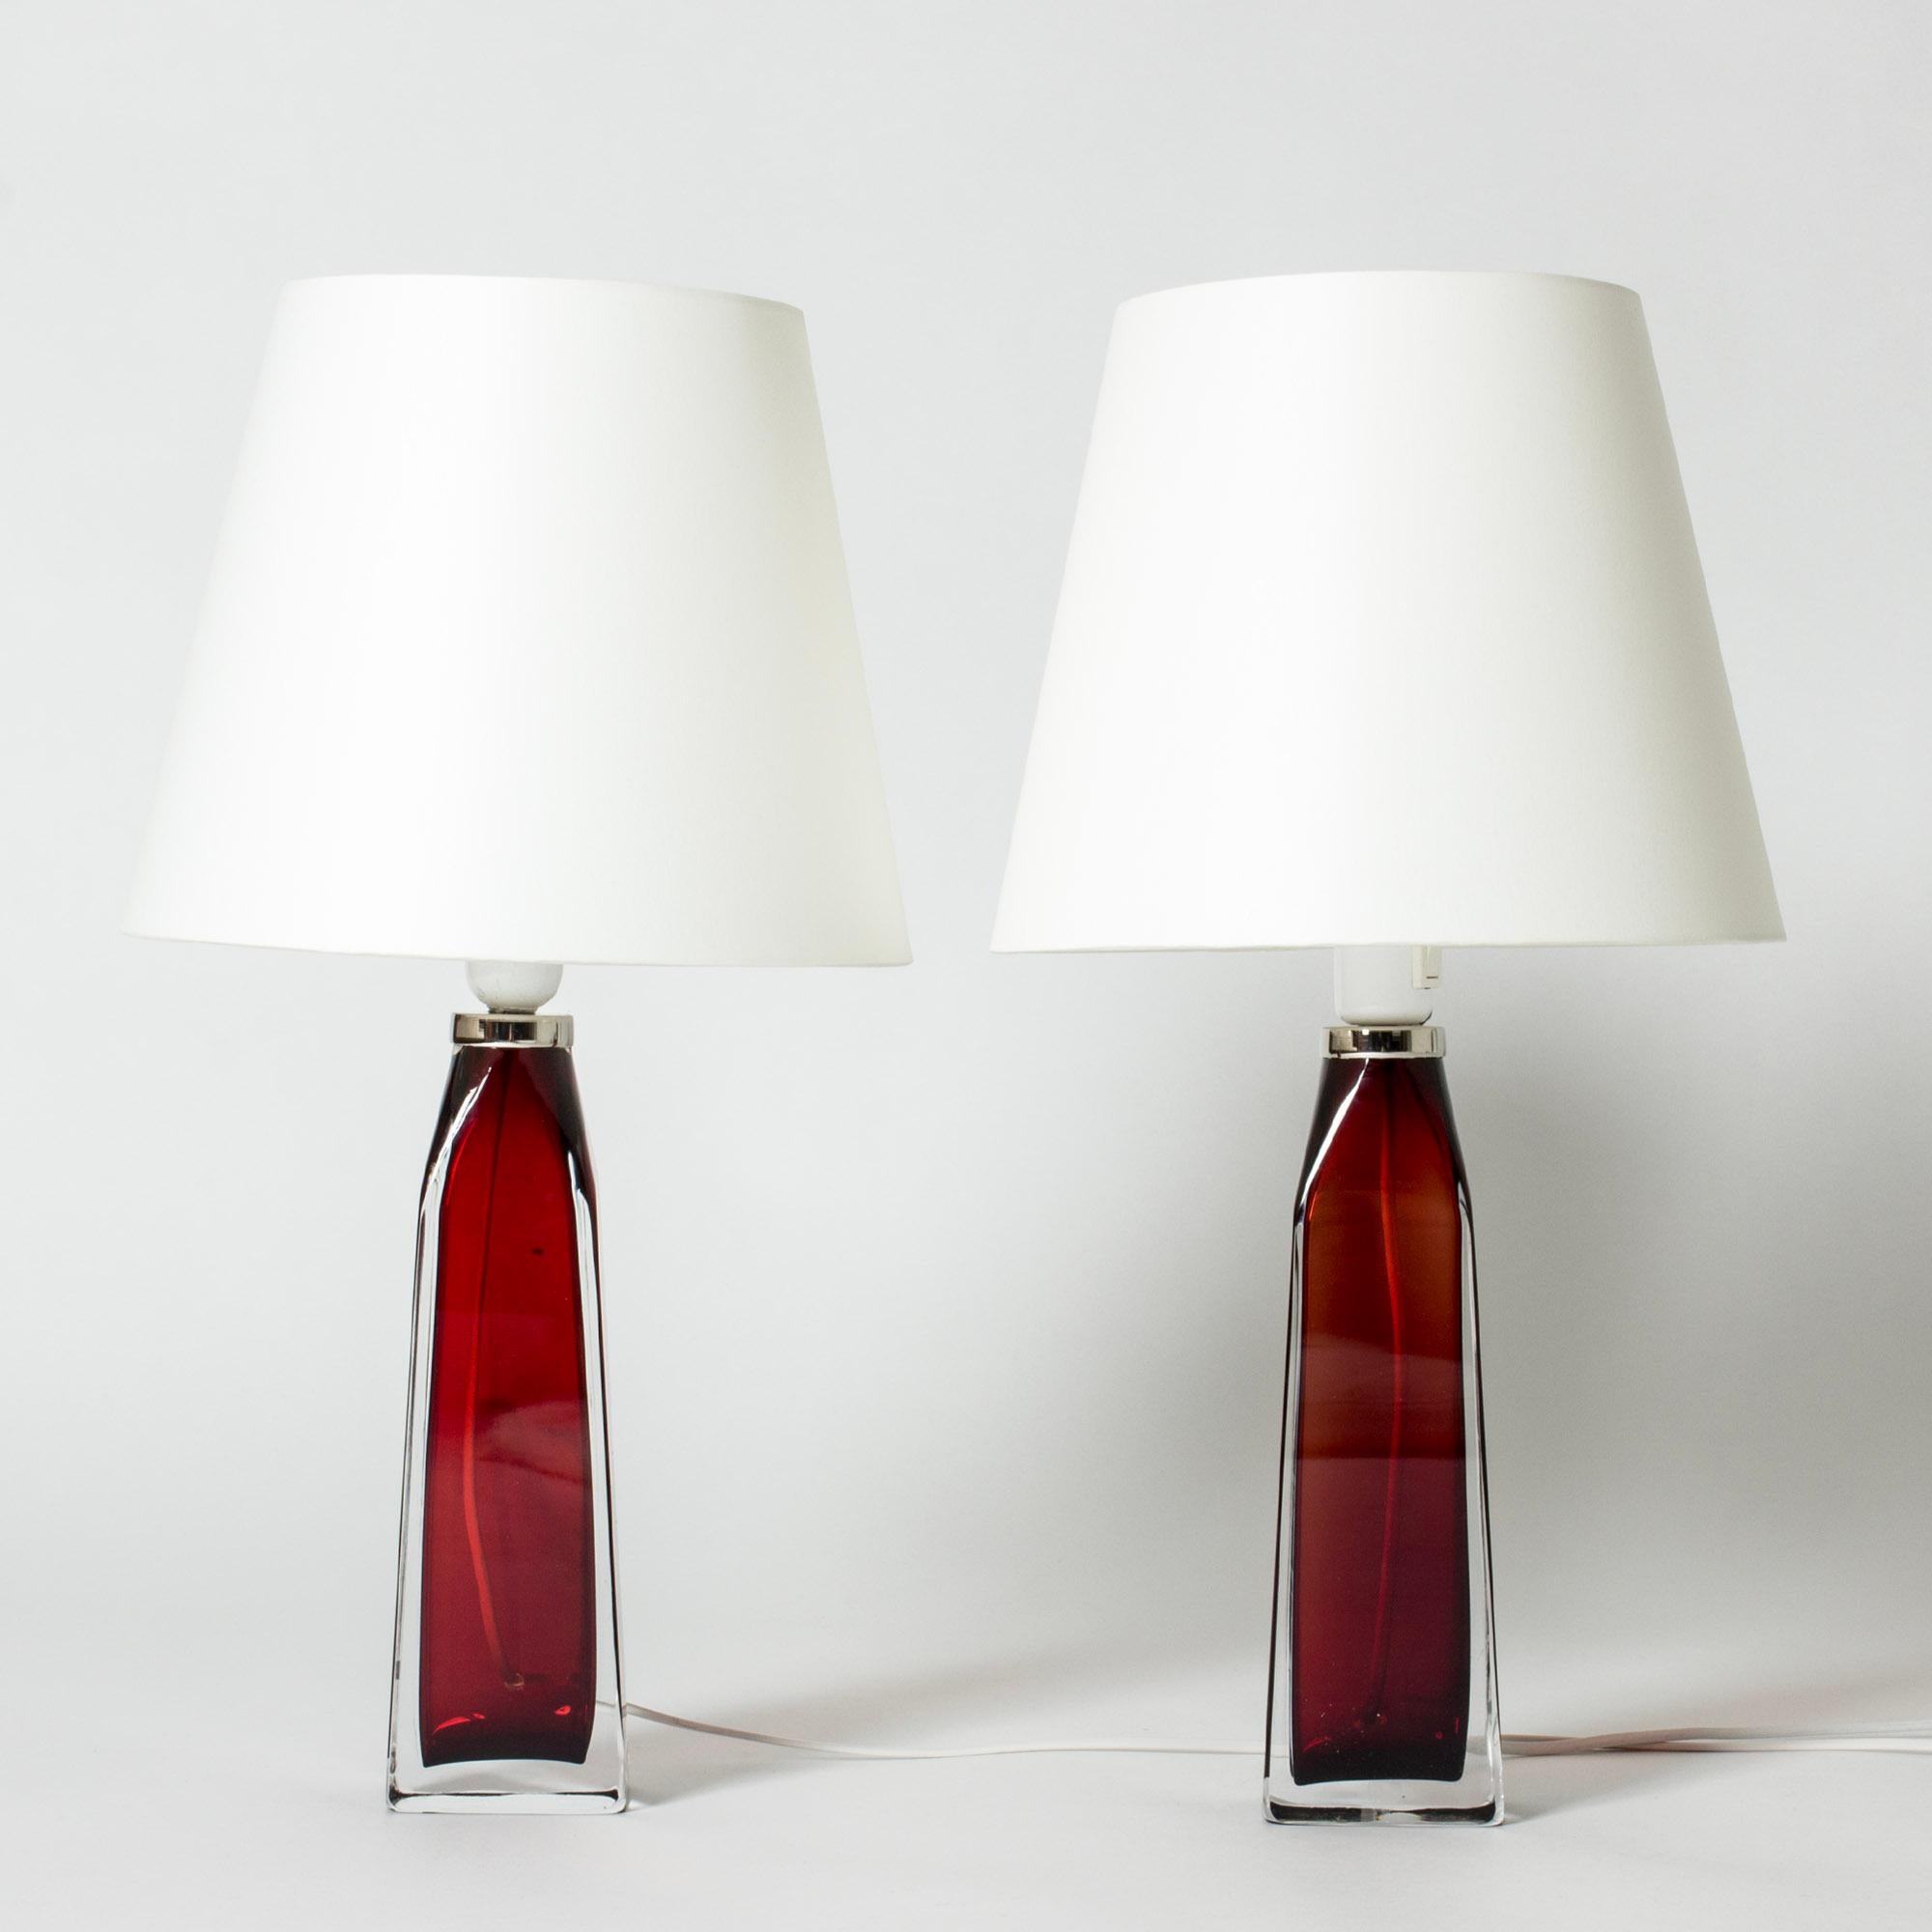 Scandinavian Modern Midcentury Glass Table Lamps by Carl Fagerlund, Orrefors, Sweden, 1960s For Sale